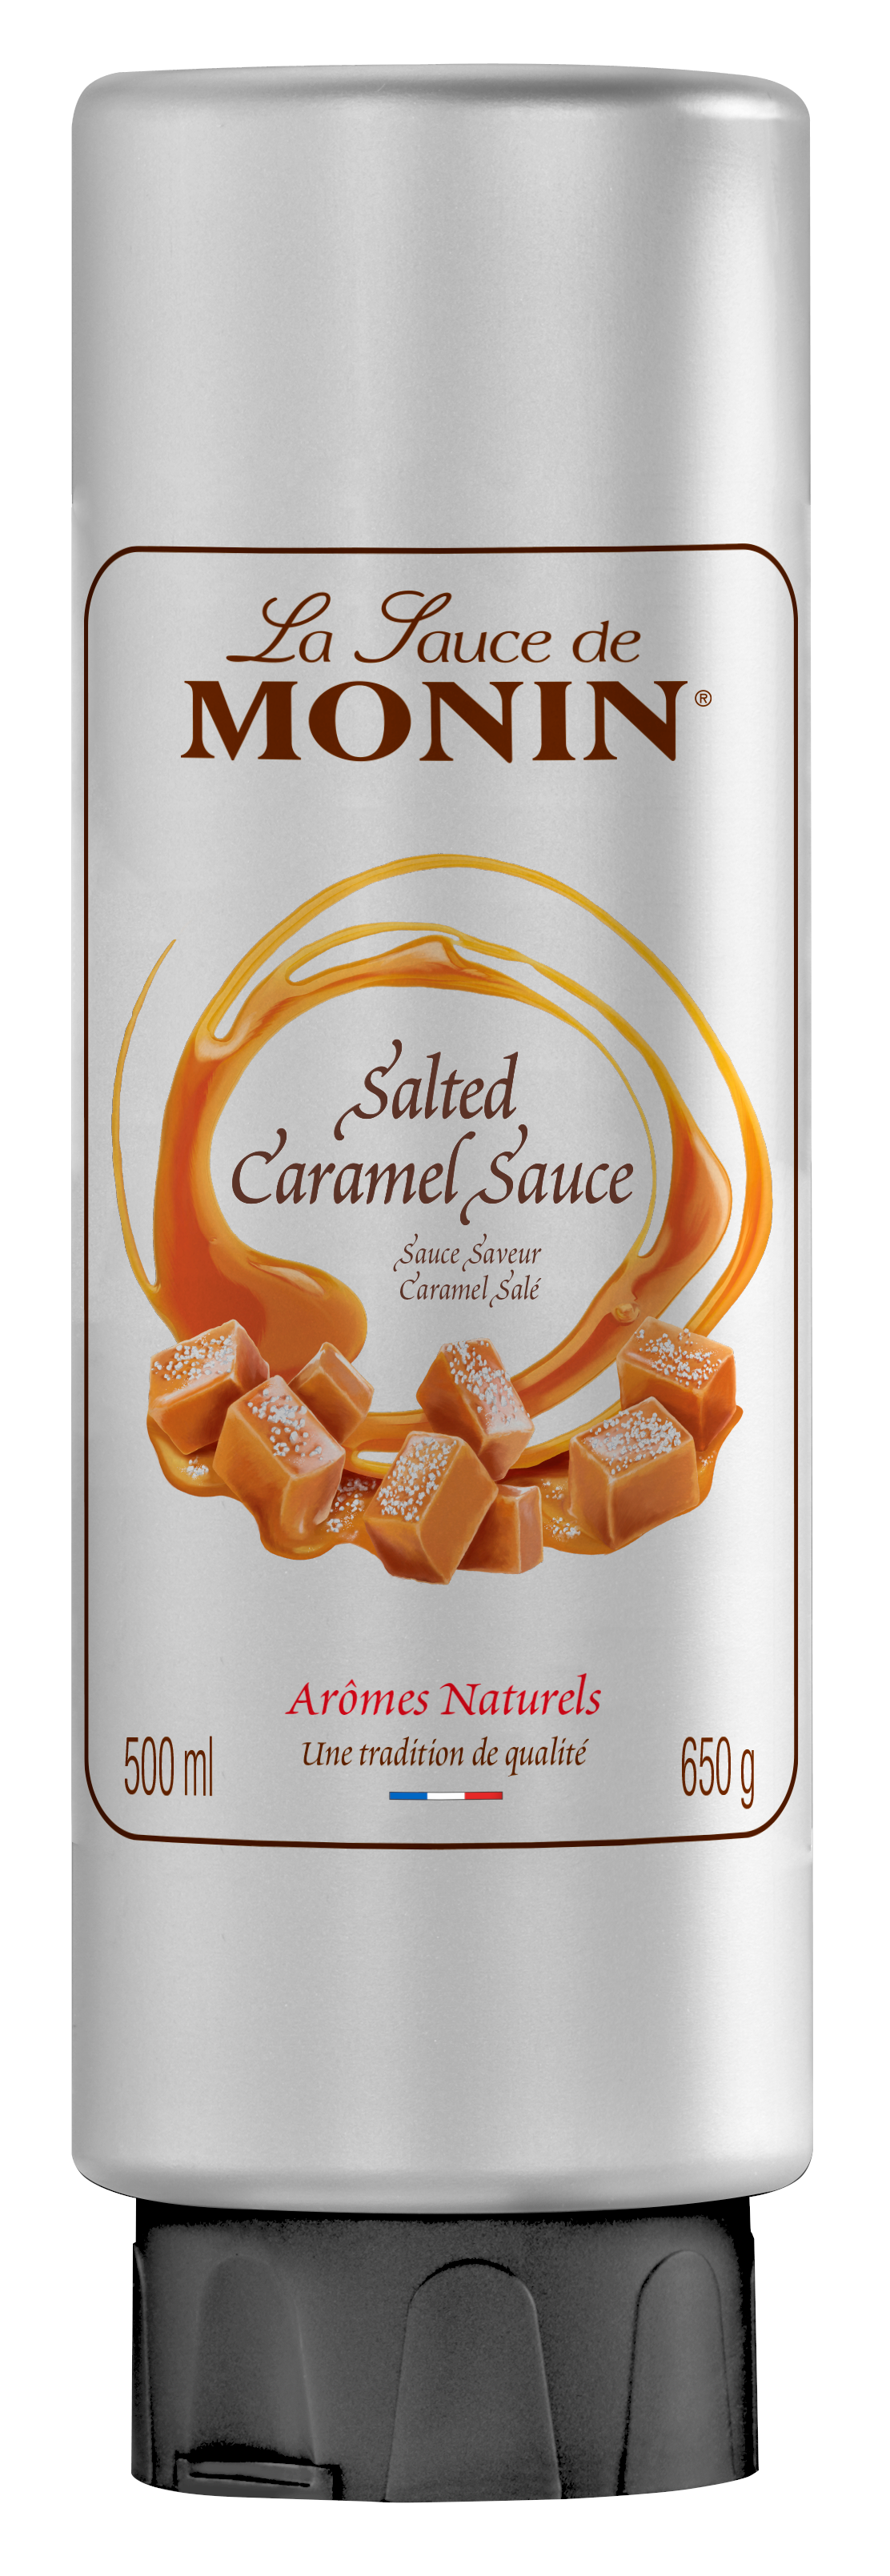 Buy MONIN Salted Caramel Sauce. It is a perfect match for all coffee, chocolate, and cocktail applications.